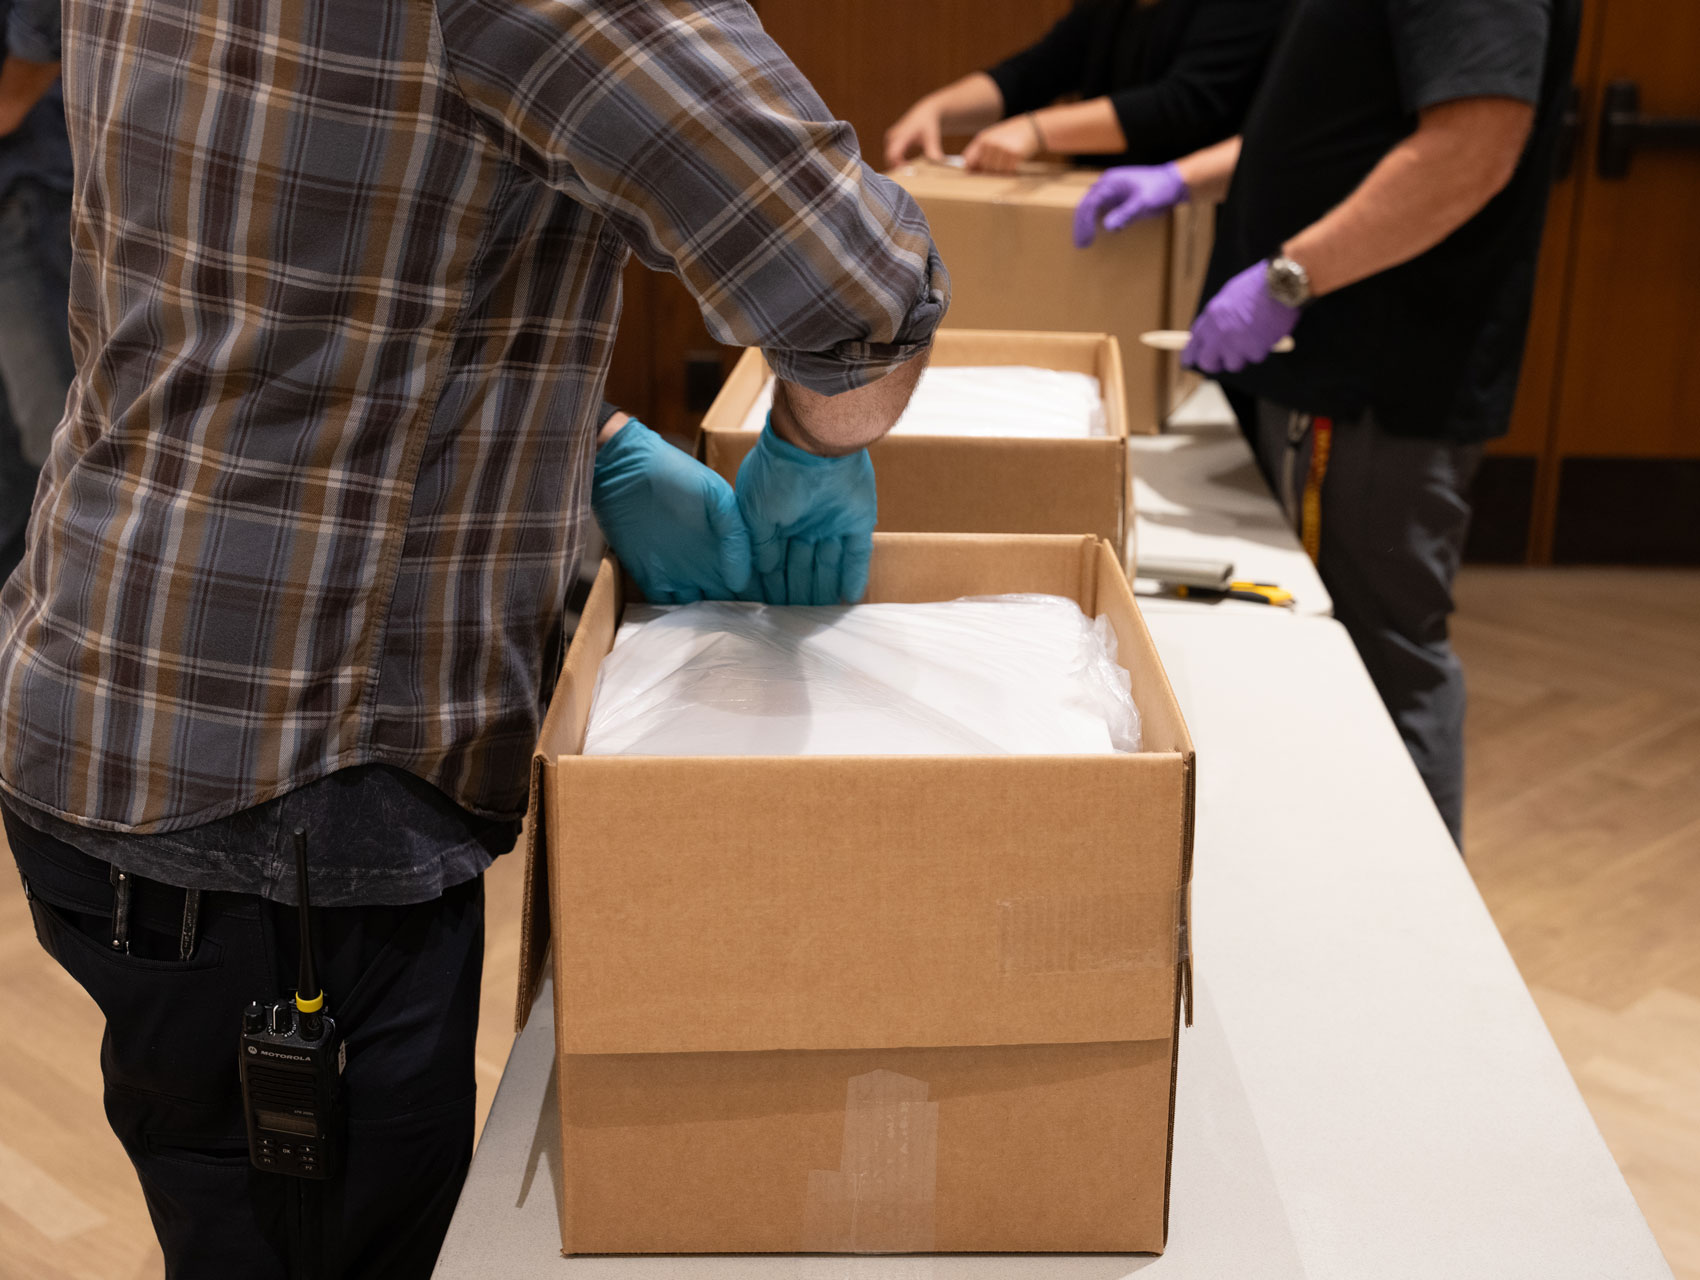 L&A staff packaging materials in a box